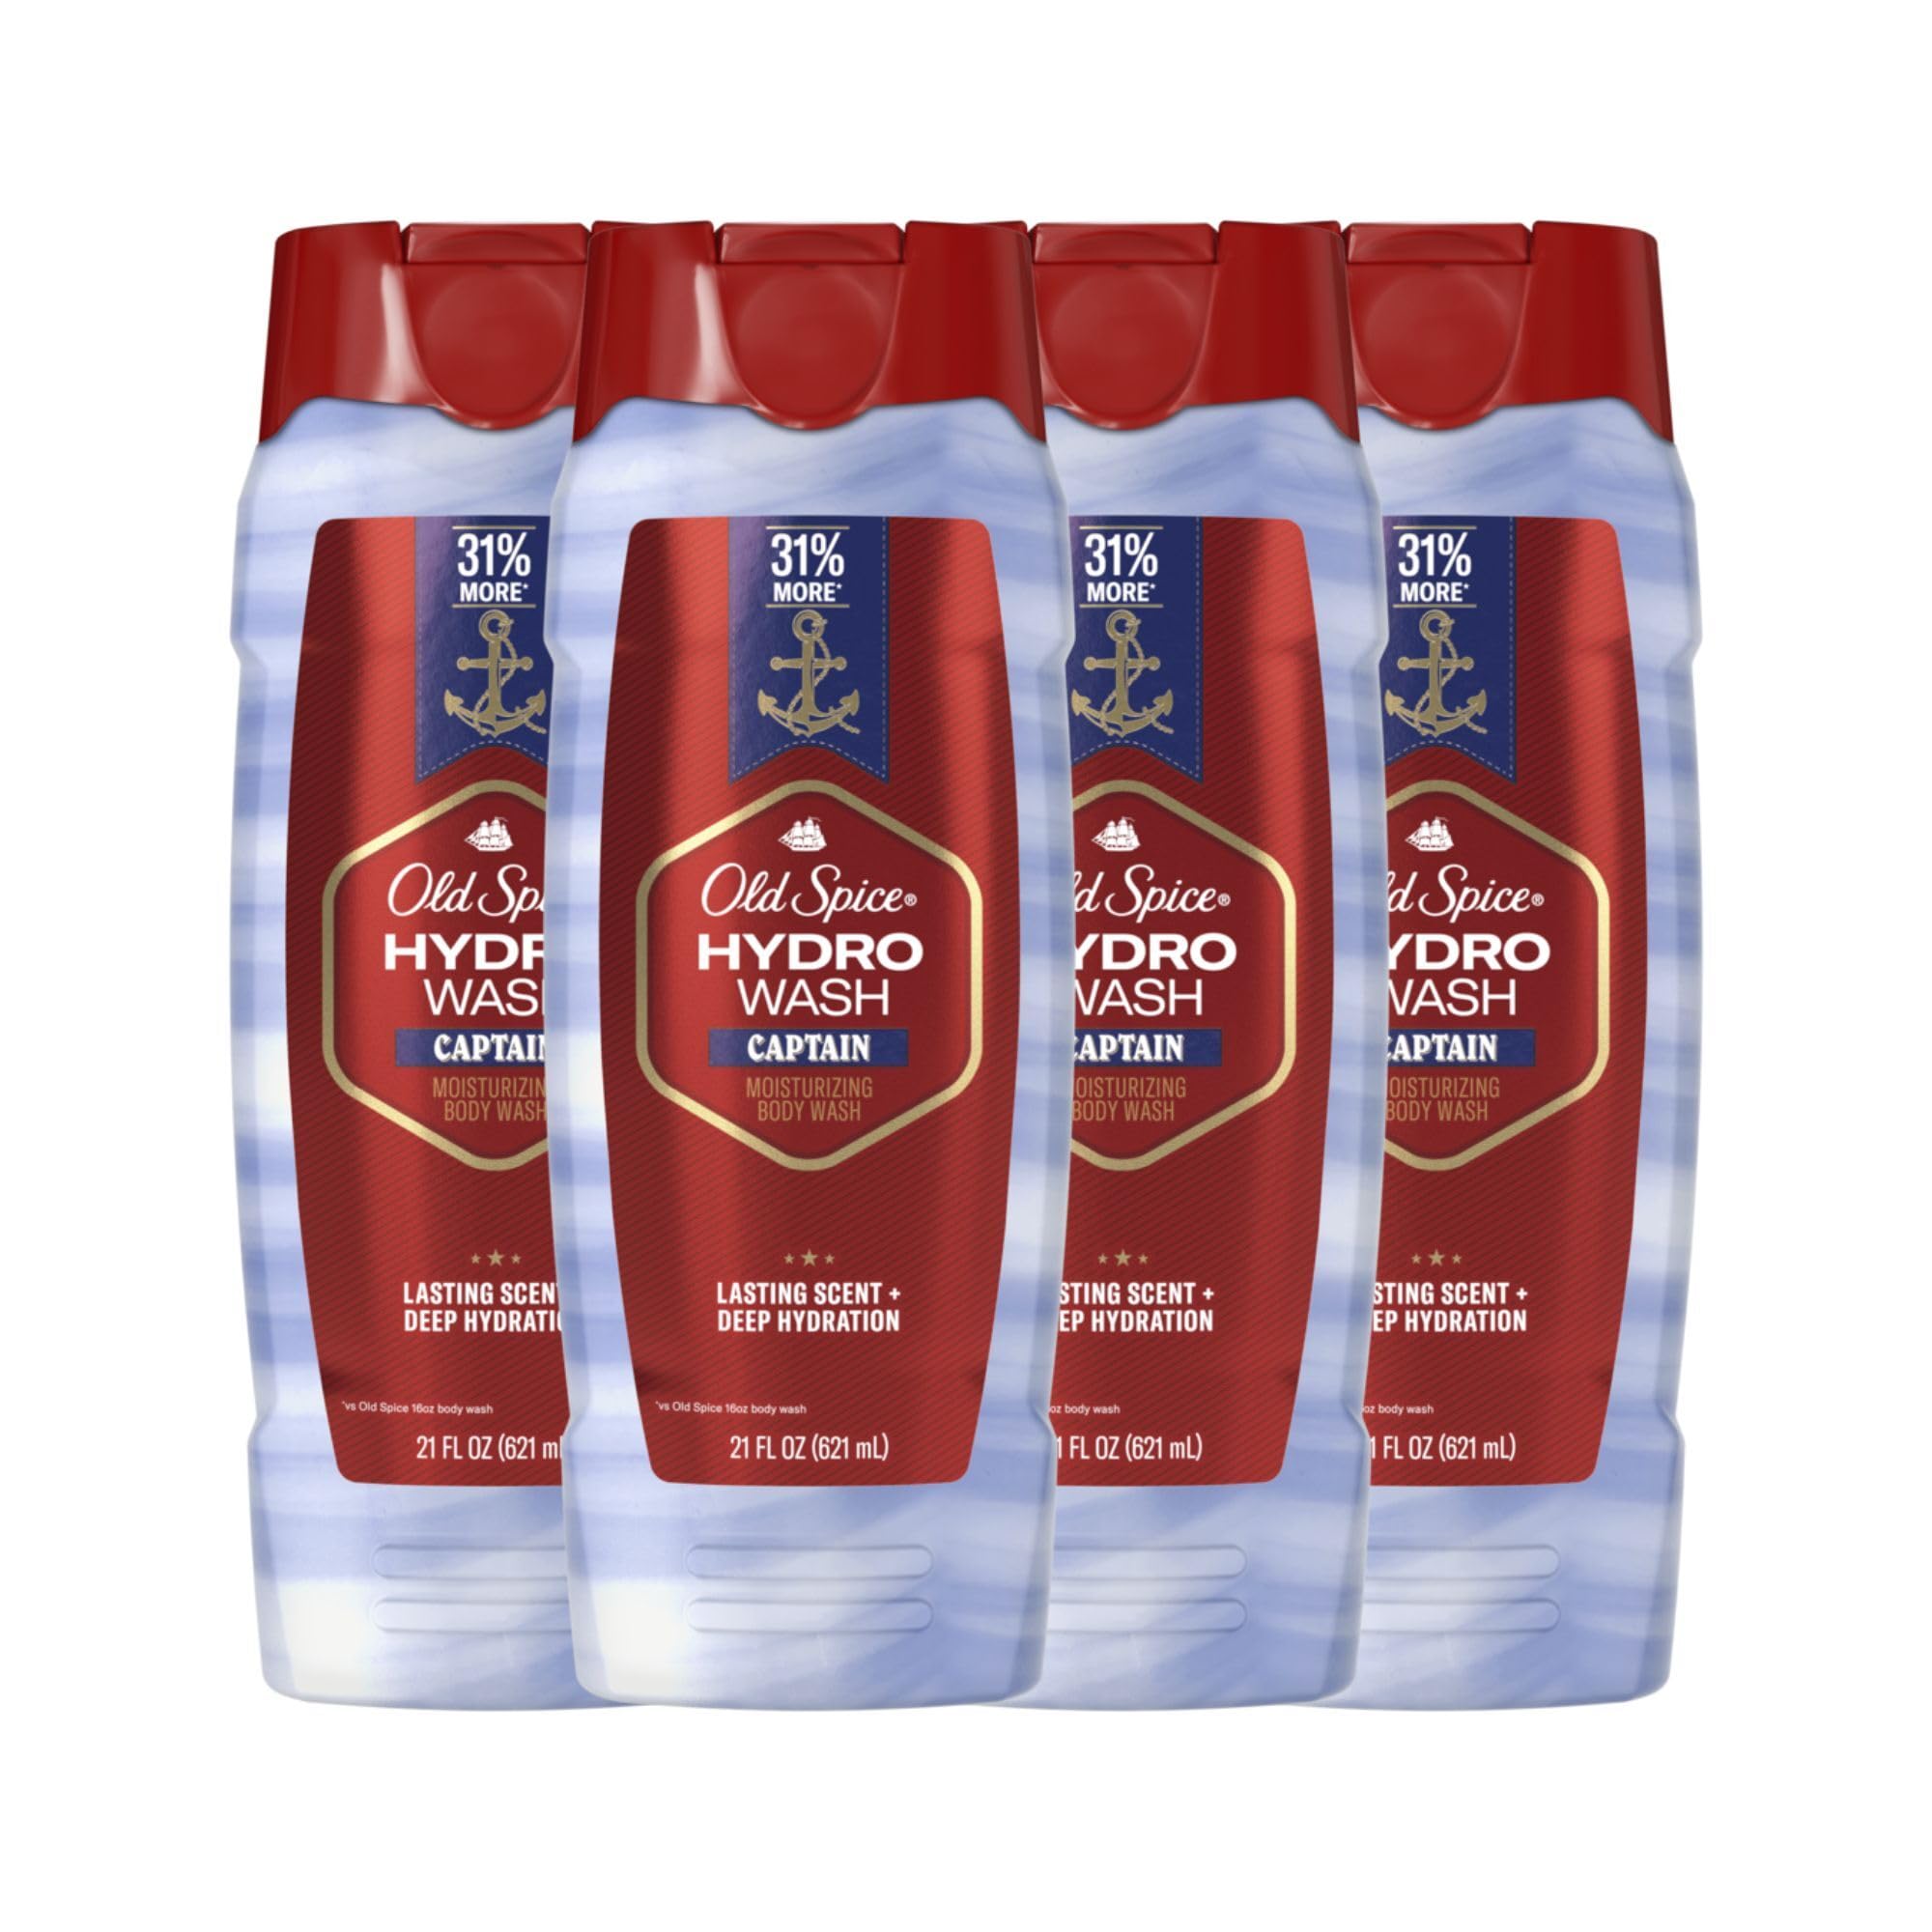 Old Spice Men's Body Wash Moisturizing Hydro Wash, Captain Scent, 21 oz (Pack of 4)